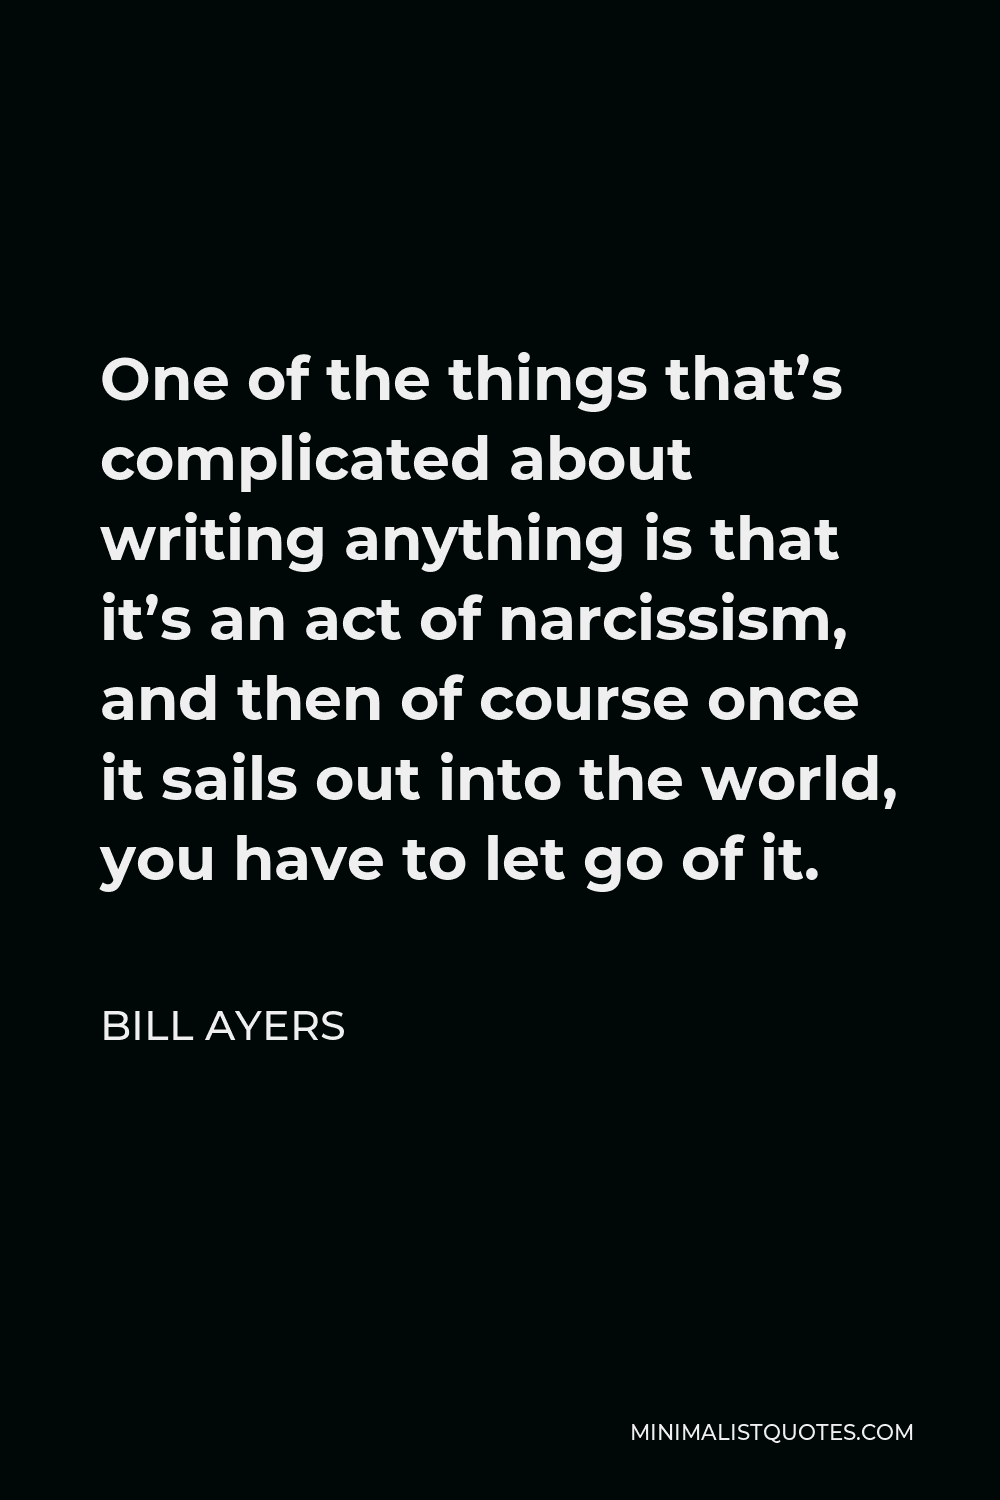 Bill Ayers Quote - One of the things that’s complicated about writing anything is that it’s an act of narcissism, and then of course once it sails out into the world, you have to let go of it.